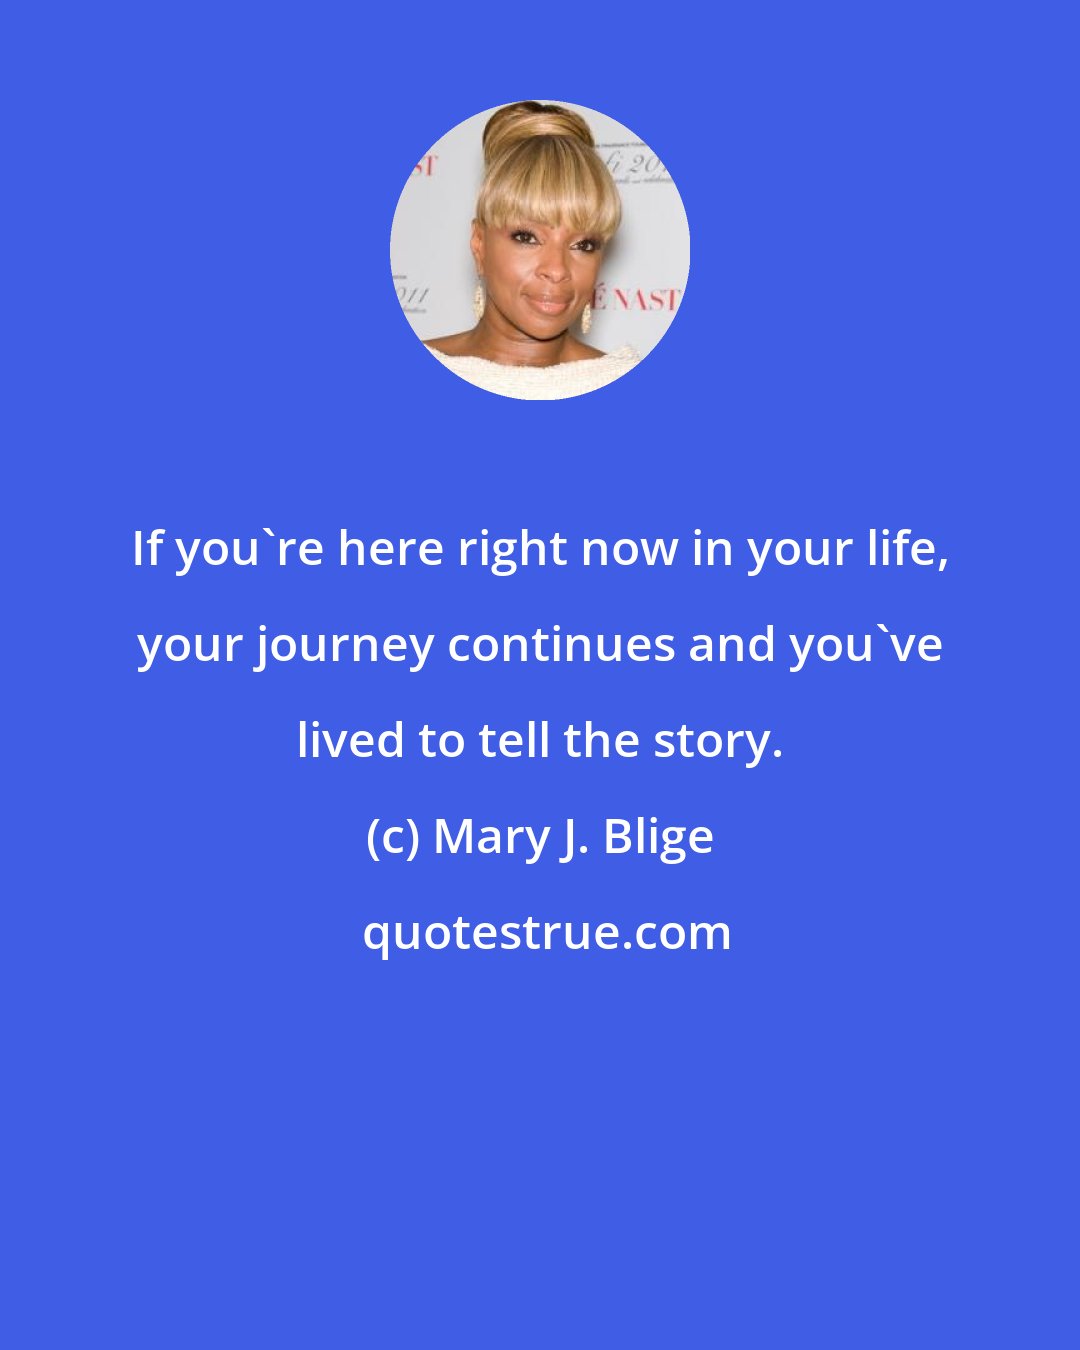 Mary J. Blige: If you're here right now in your life, your journey continues and you've lived to tell the story.